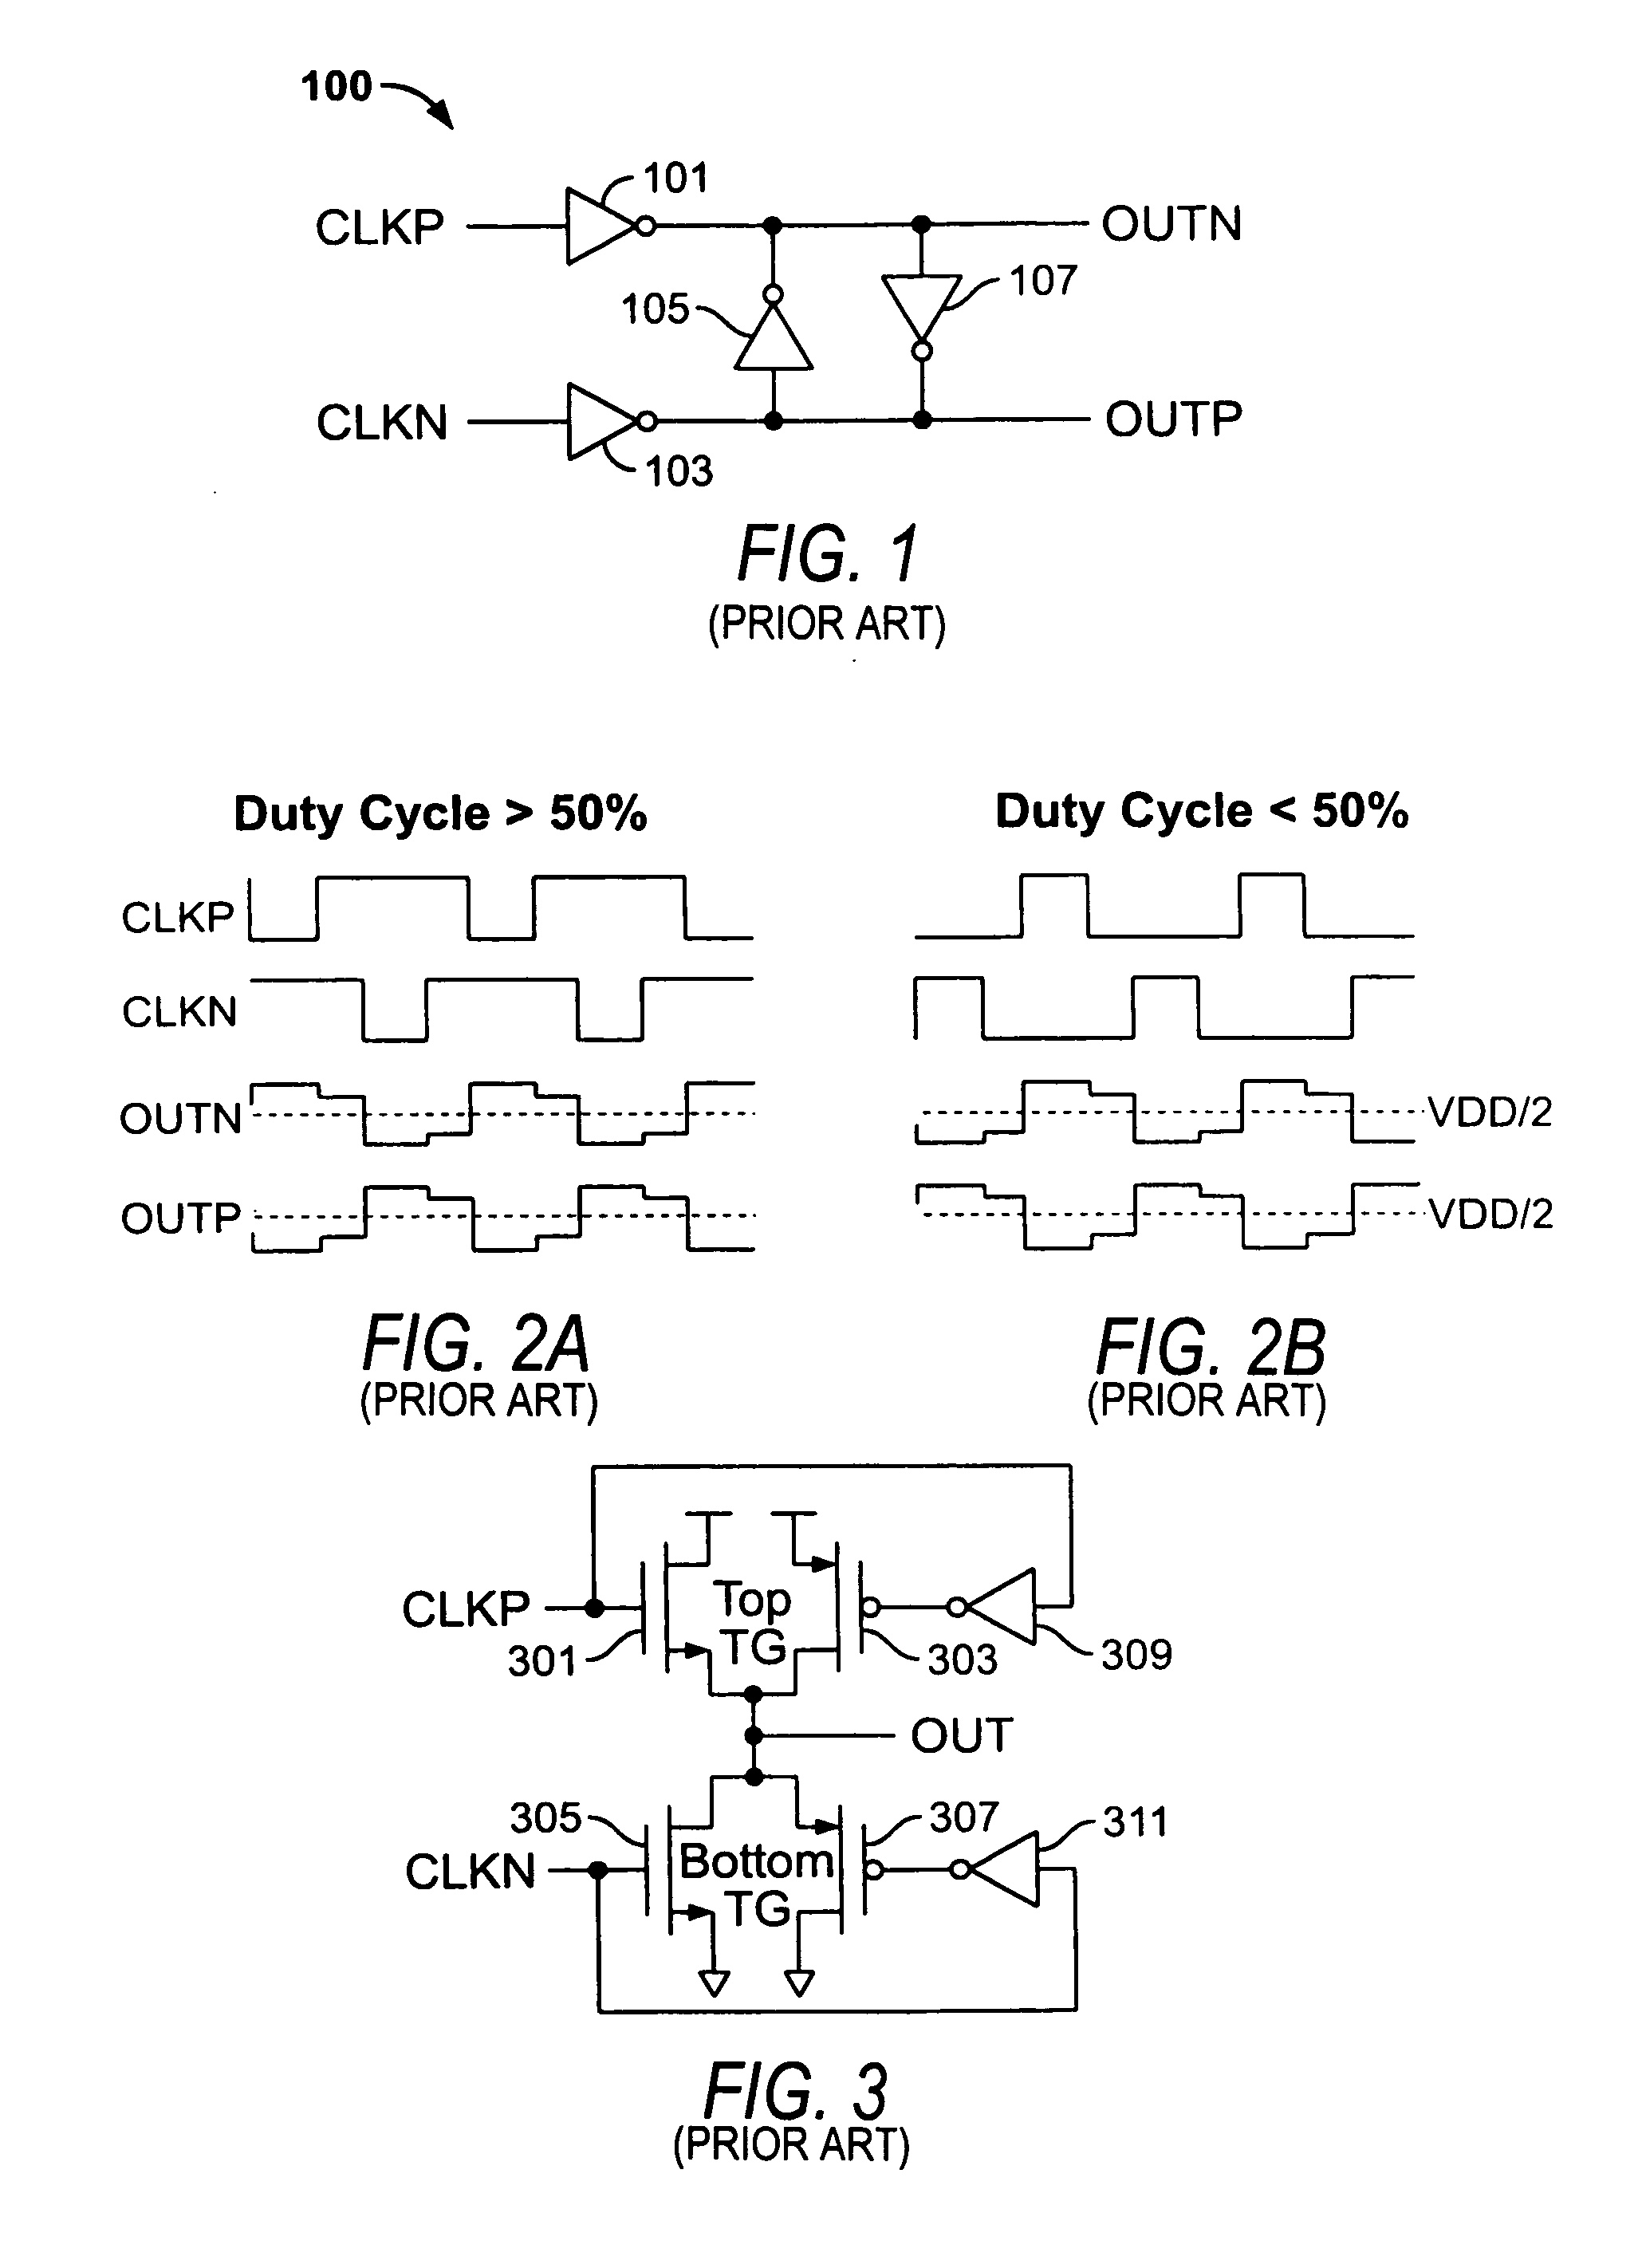 Duty cycle correction methods and circuits